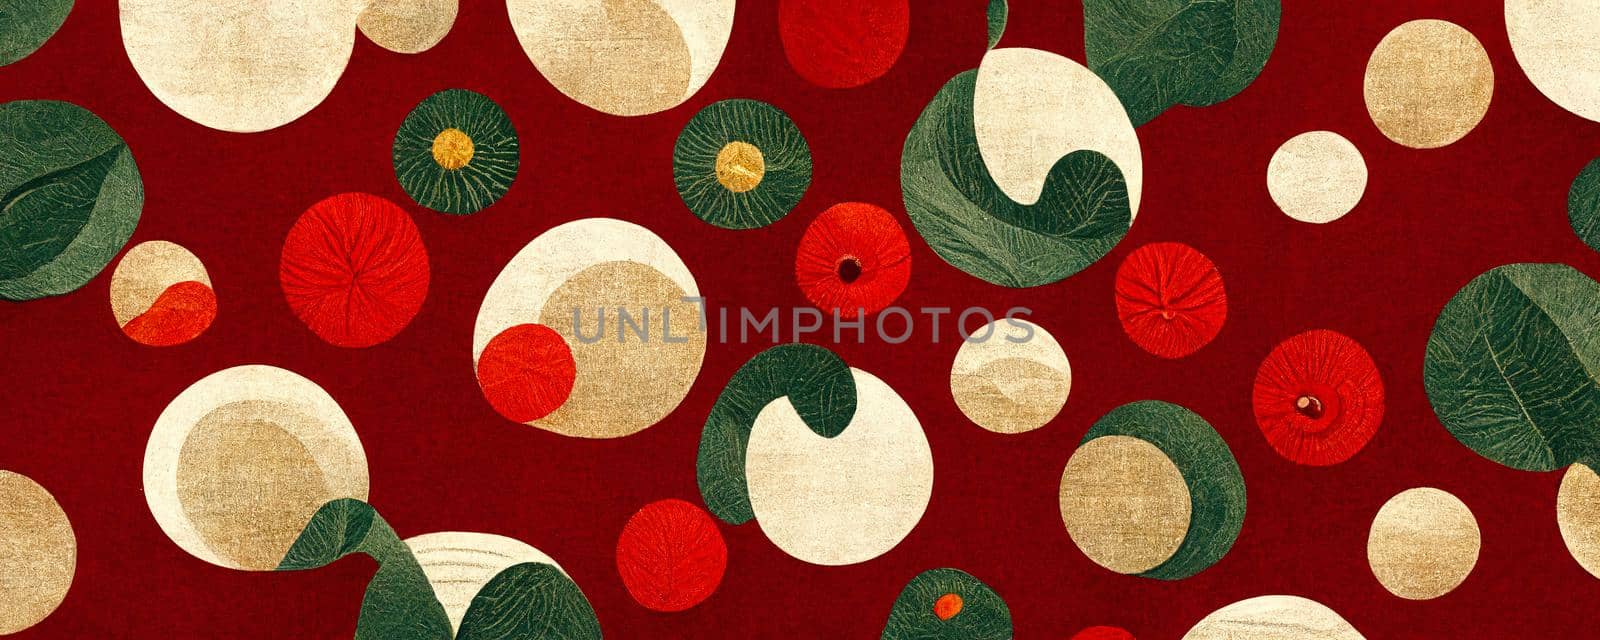 abstract floral pattern on fabric in red-yellow-green hues by TRMK